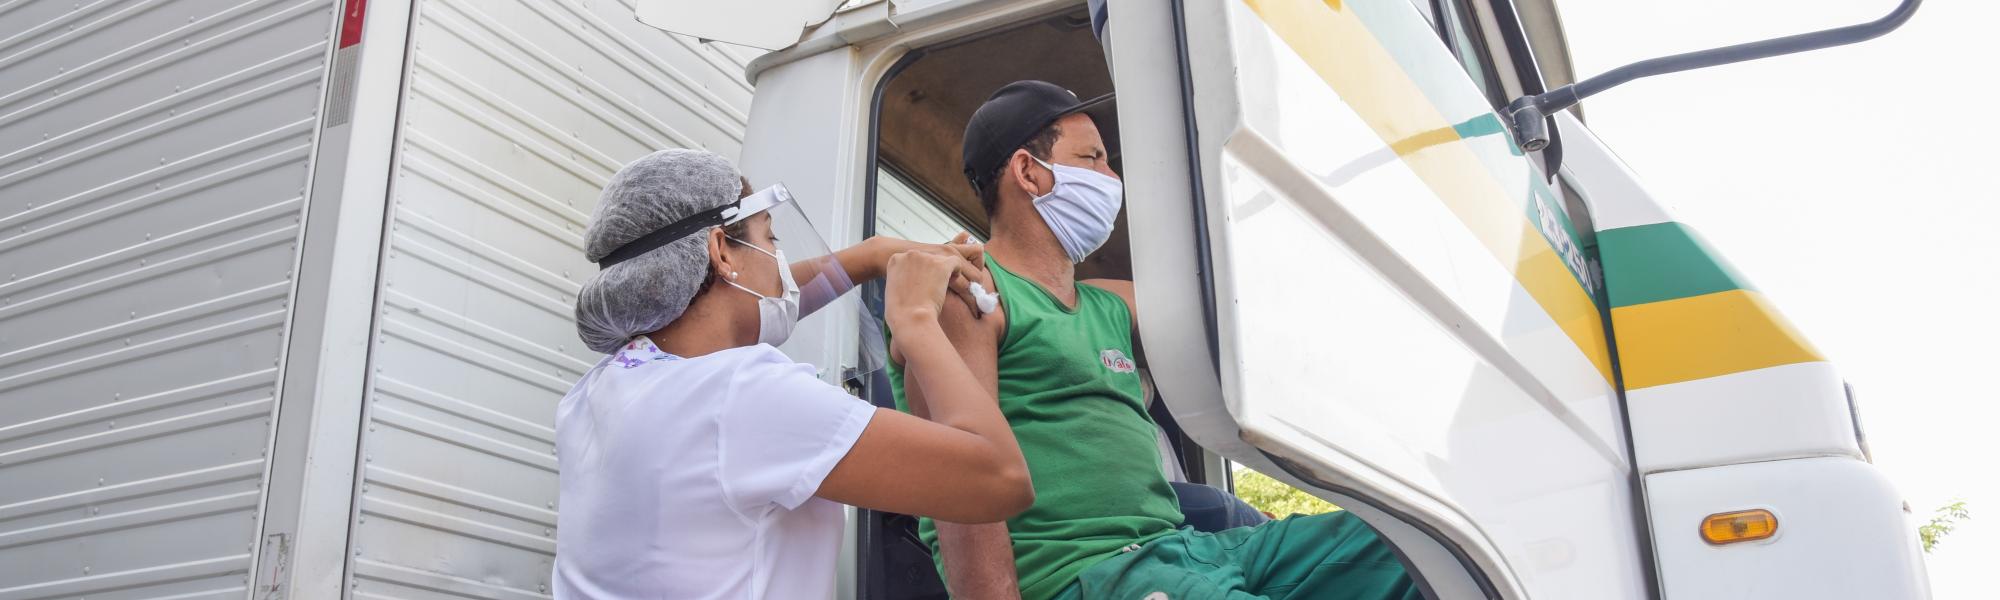 IRU sends distress call to WHO and governments on COVID-19 driver vaccinations